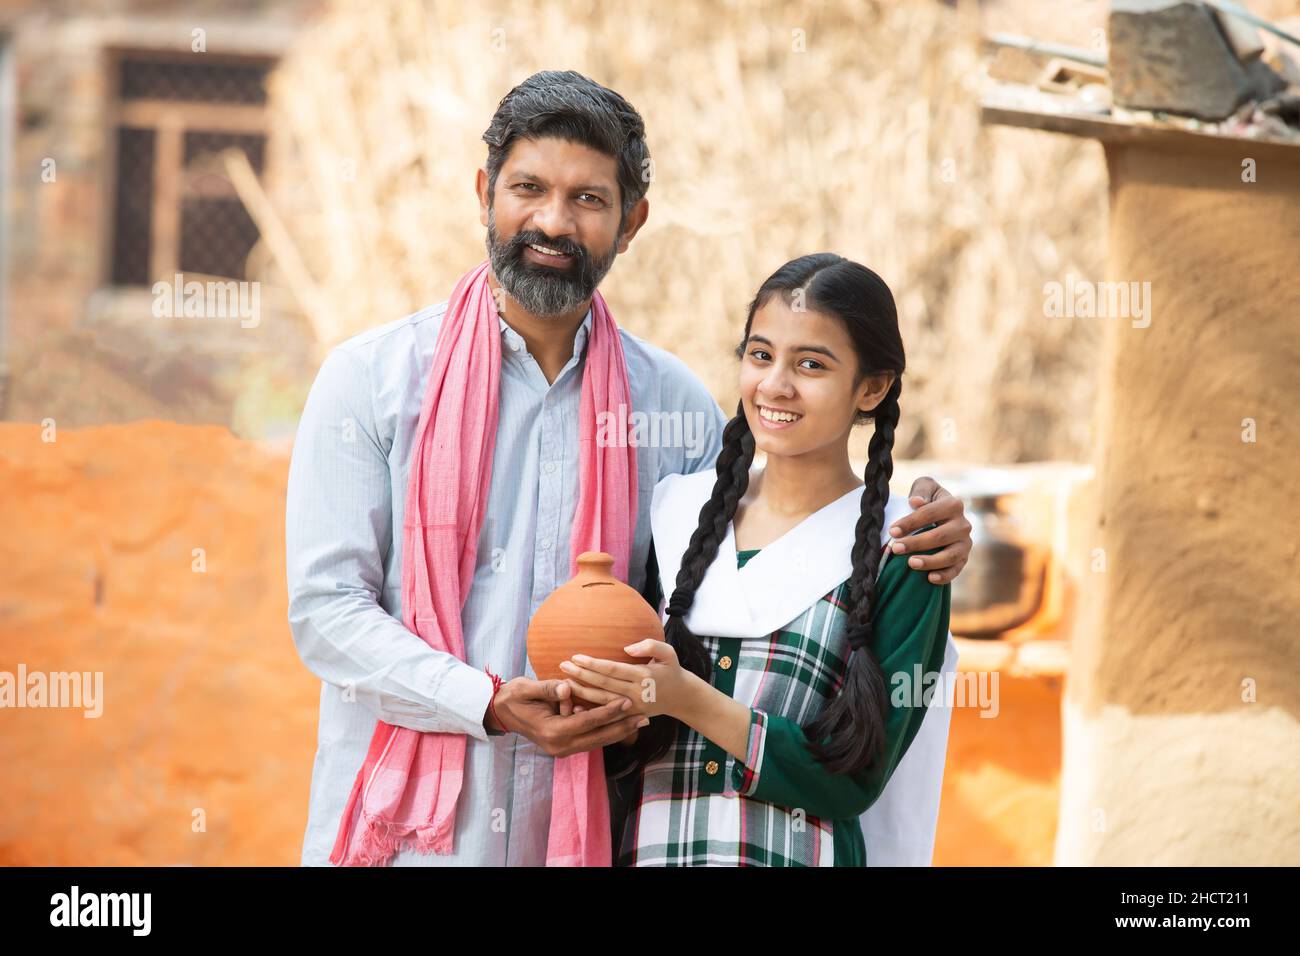 Portrait of happy Indian farmer father and daughter holding clay money box or gullak, Smiling beard man and young girl traditional piggy bank, dad tea Stock Photo